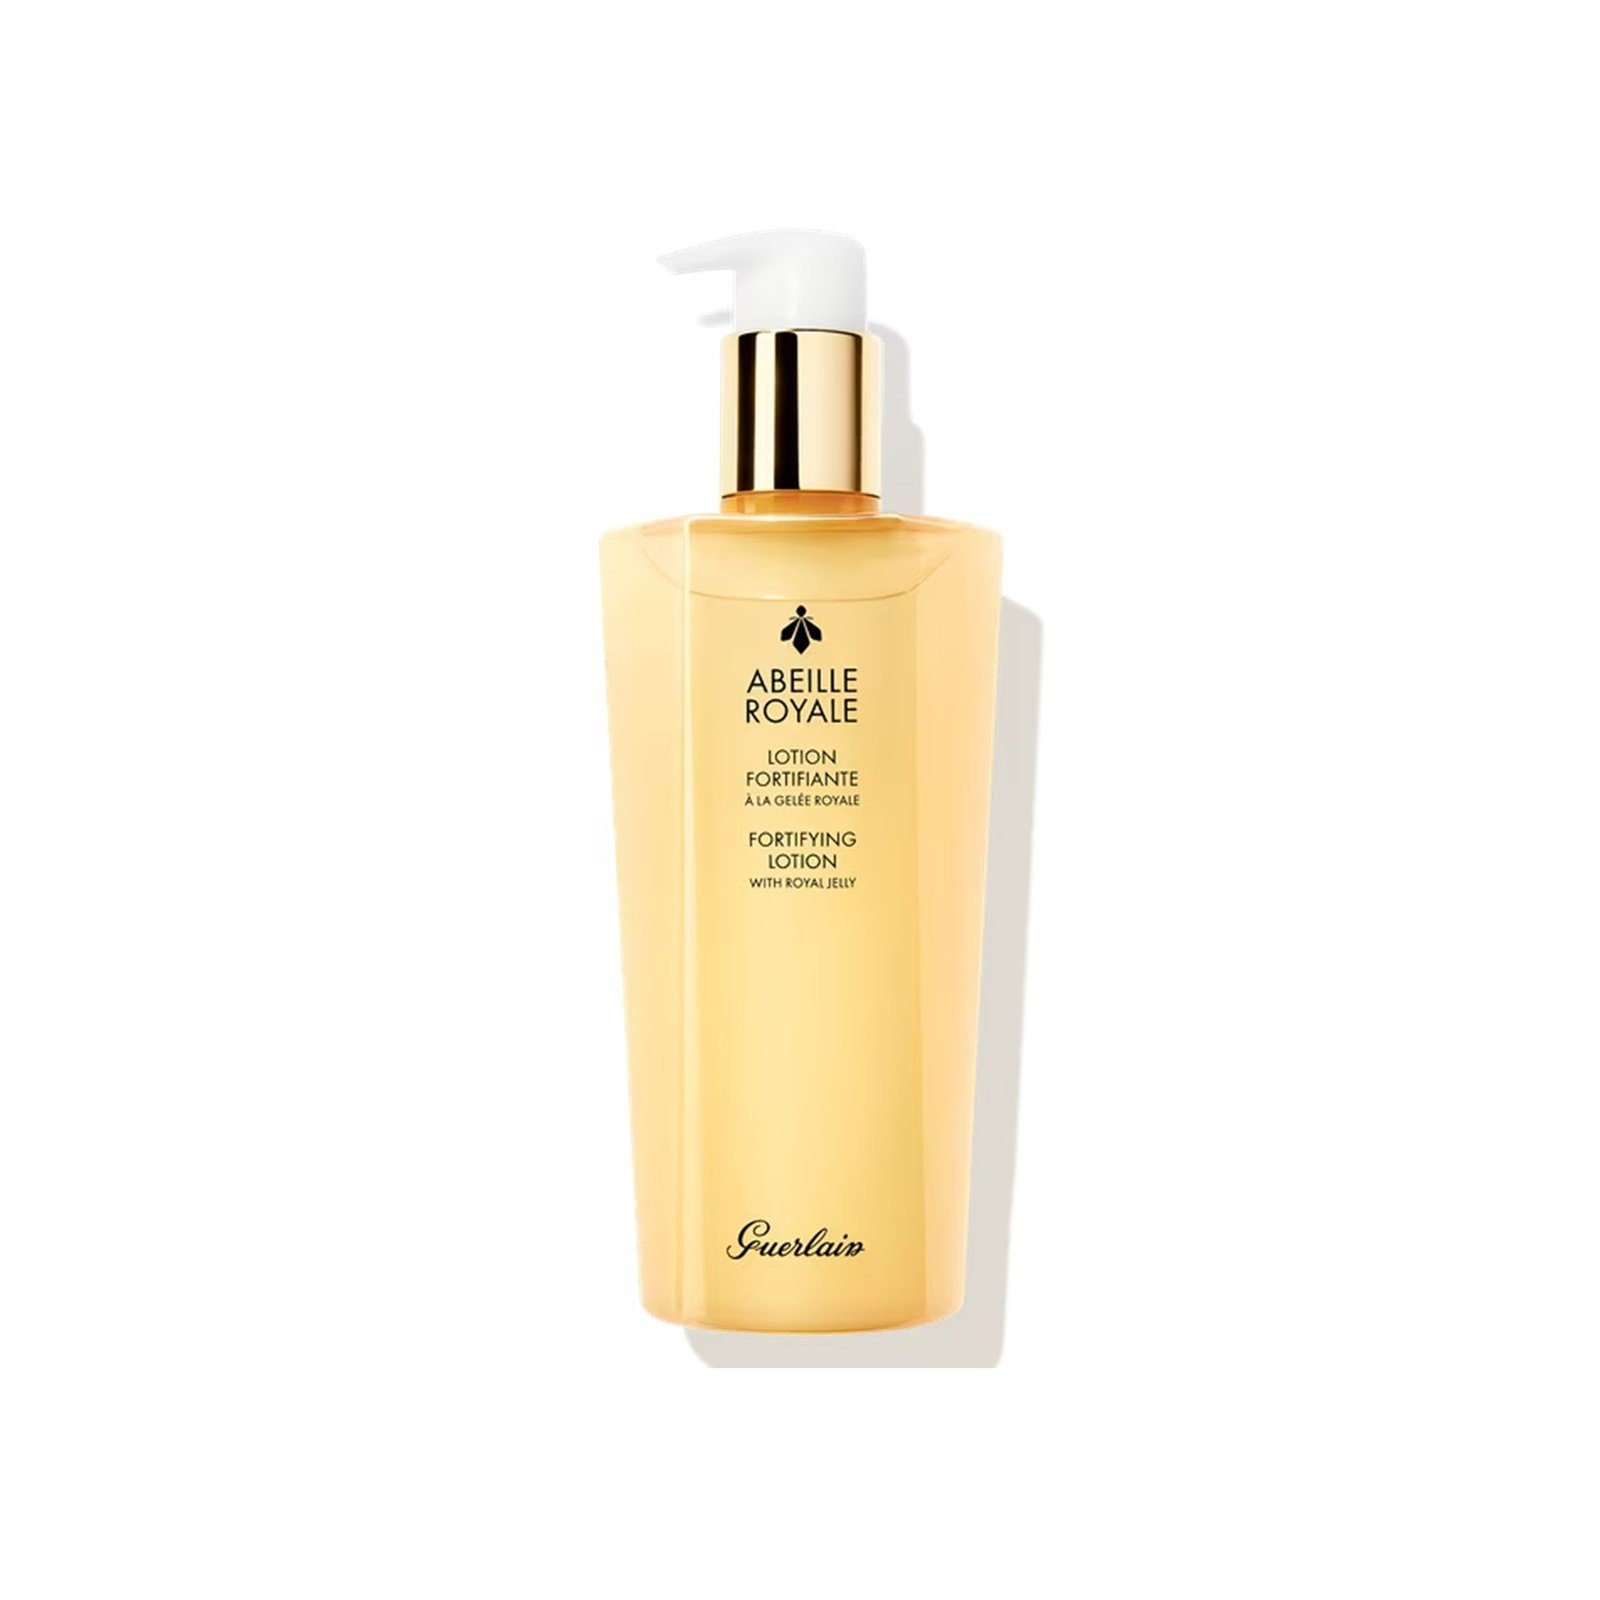 Guerlain Abeille Royale Fortifying Lotion 300ml (10.1floz)